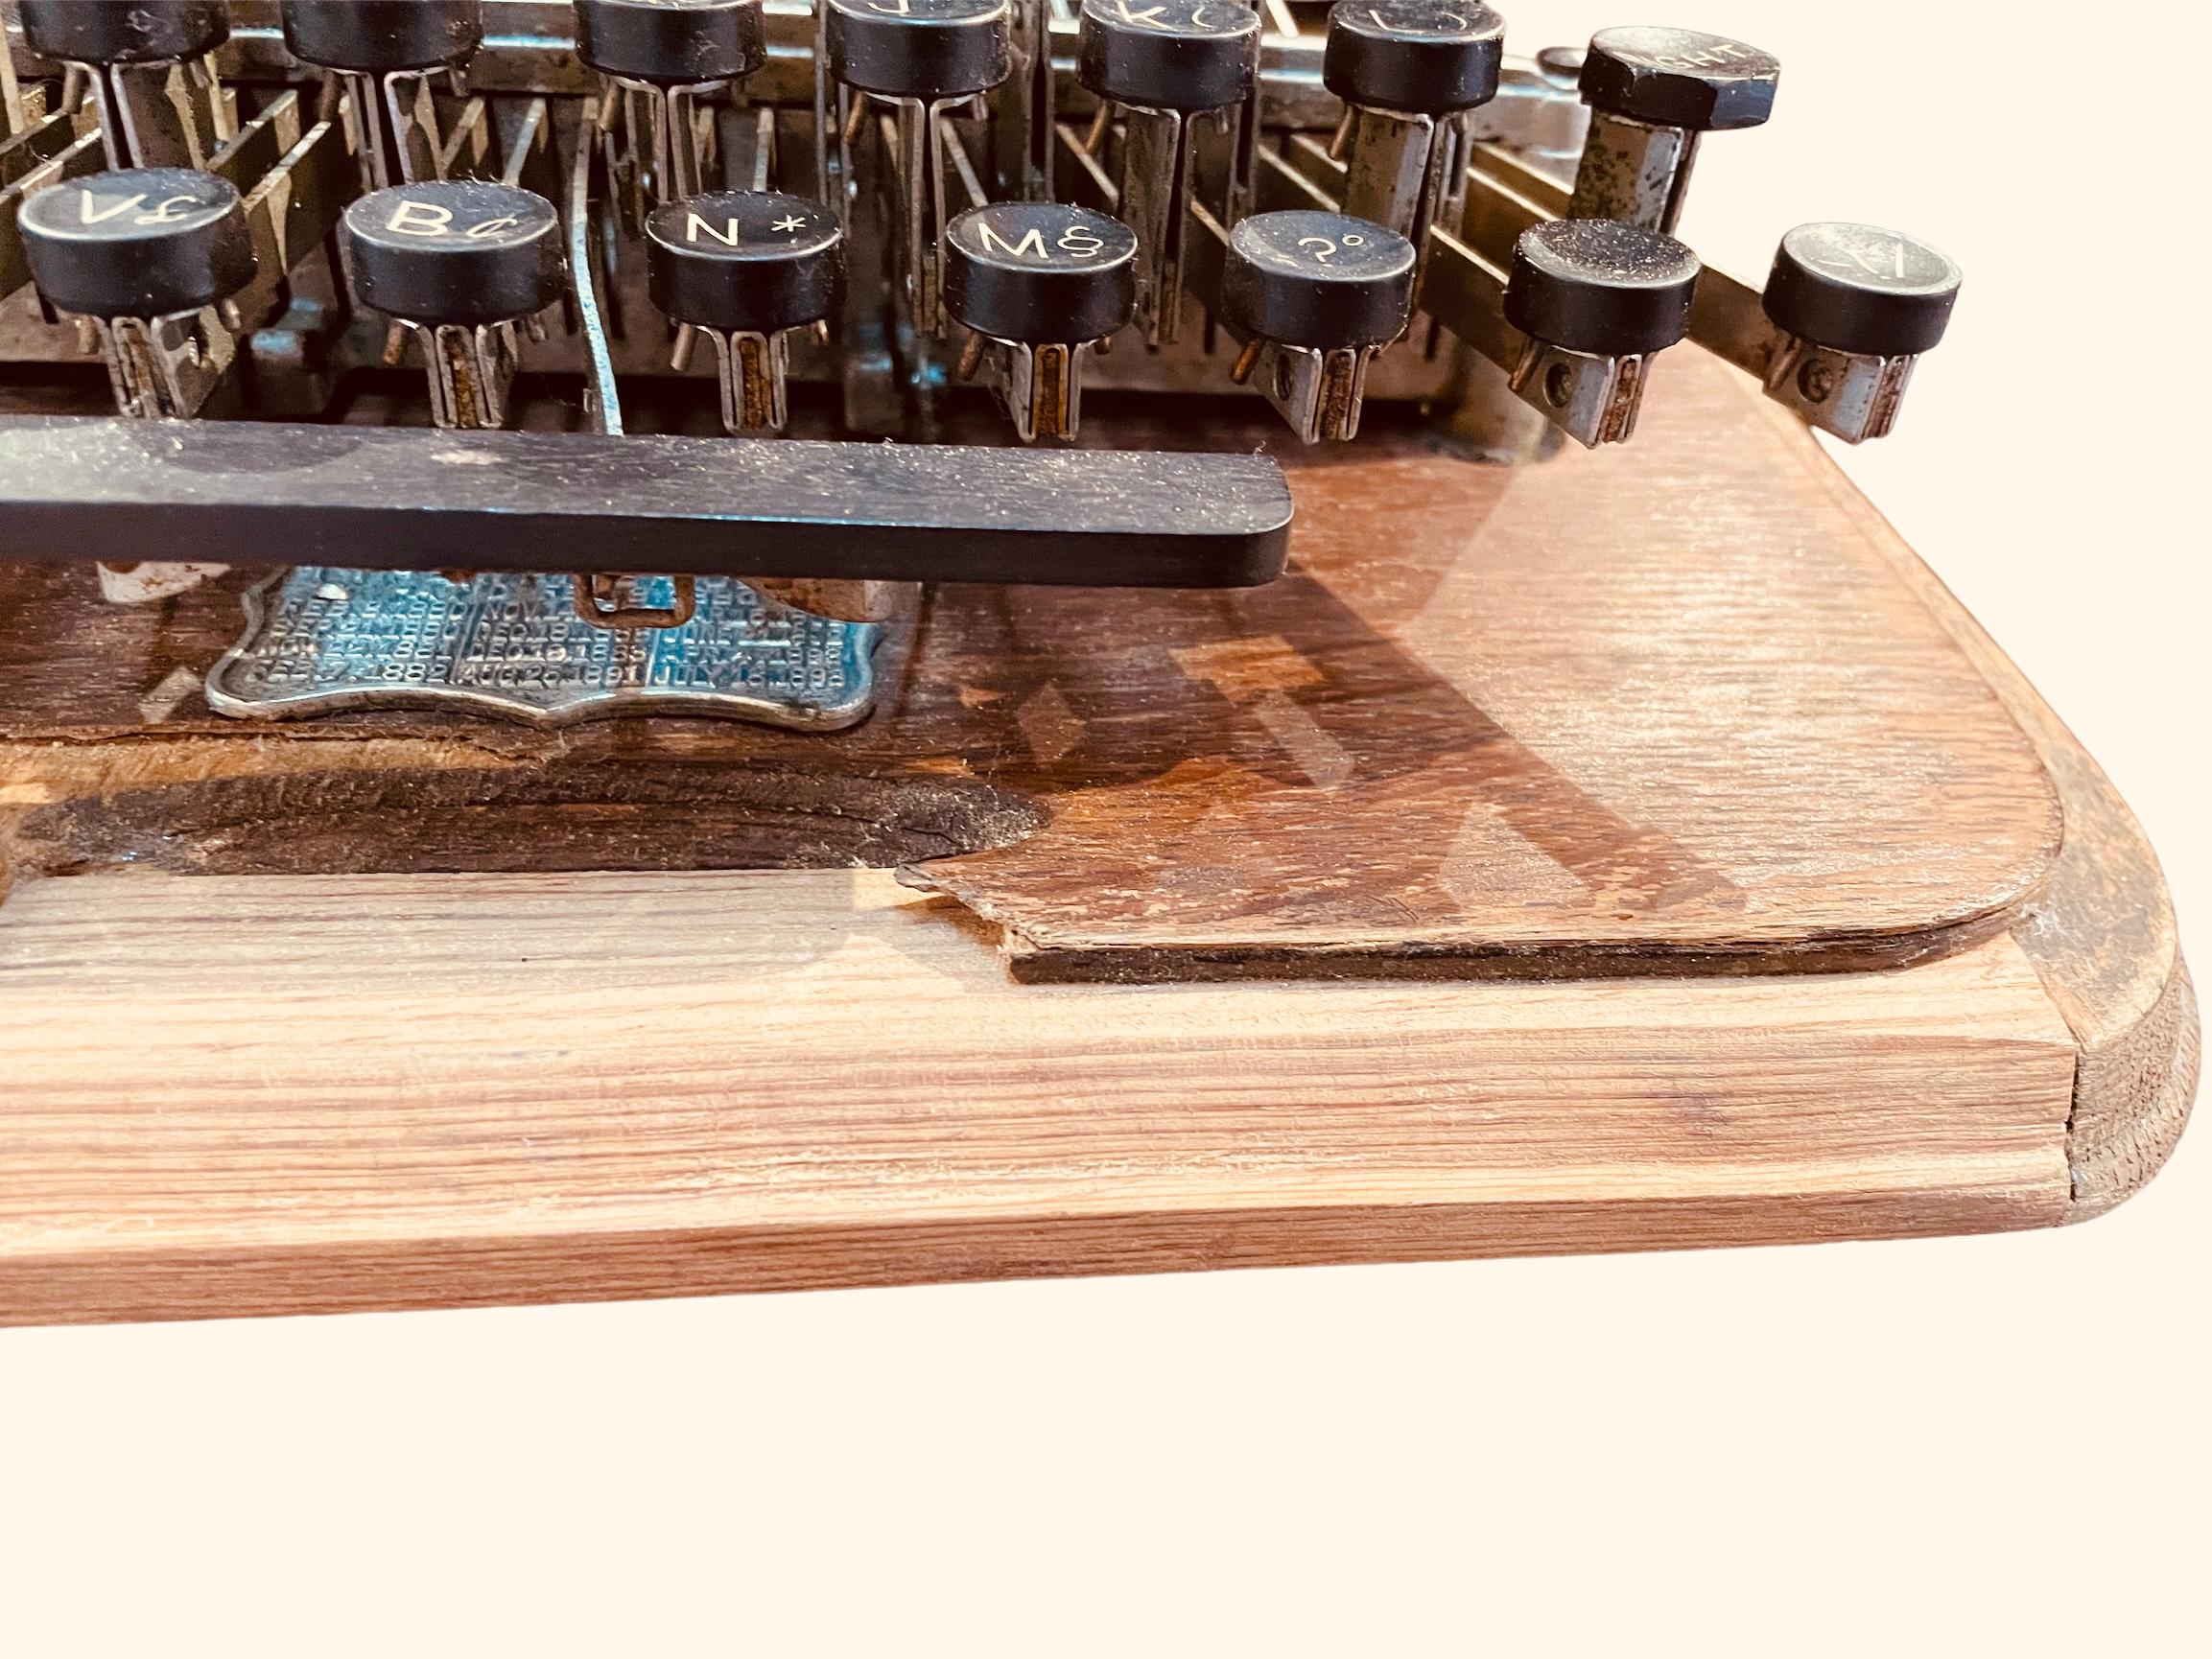 This is an American Hammond Typewriter. It was invented by James Bartlett Hammond and made by the Hammond Typewriter Company. It comes with its original oak wood top case  and repaired base board. It has an ebony celluloid keyboard. The Hammond